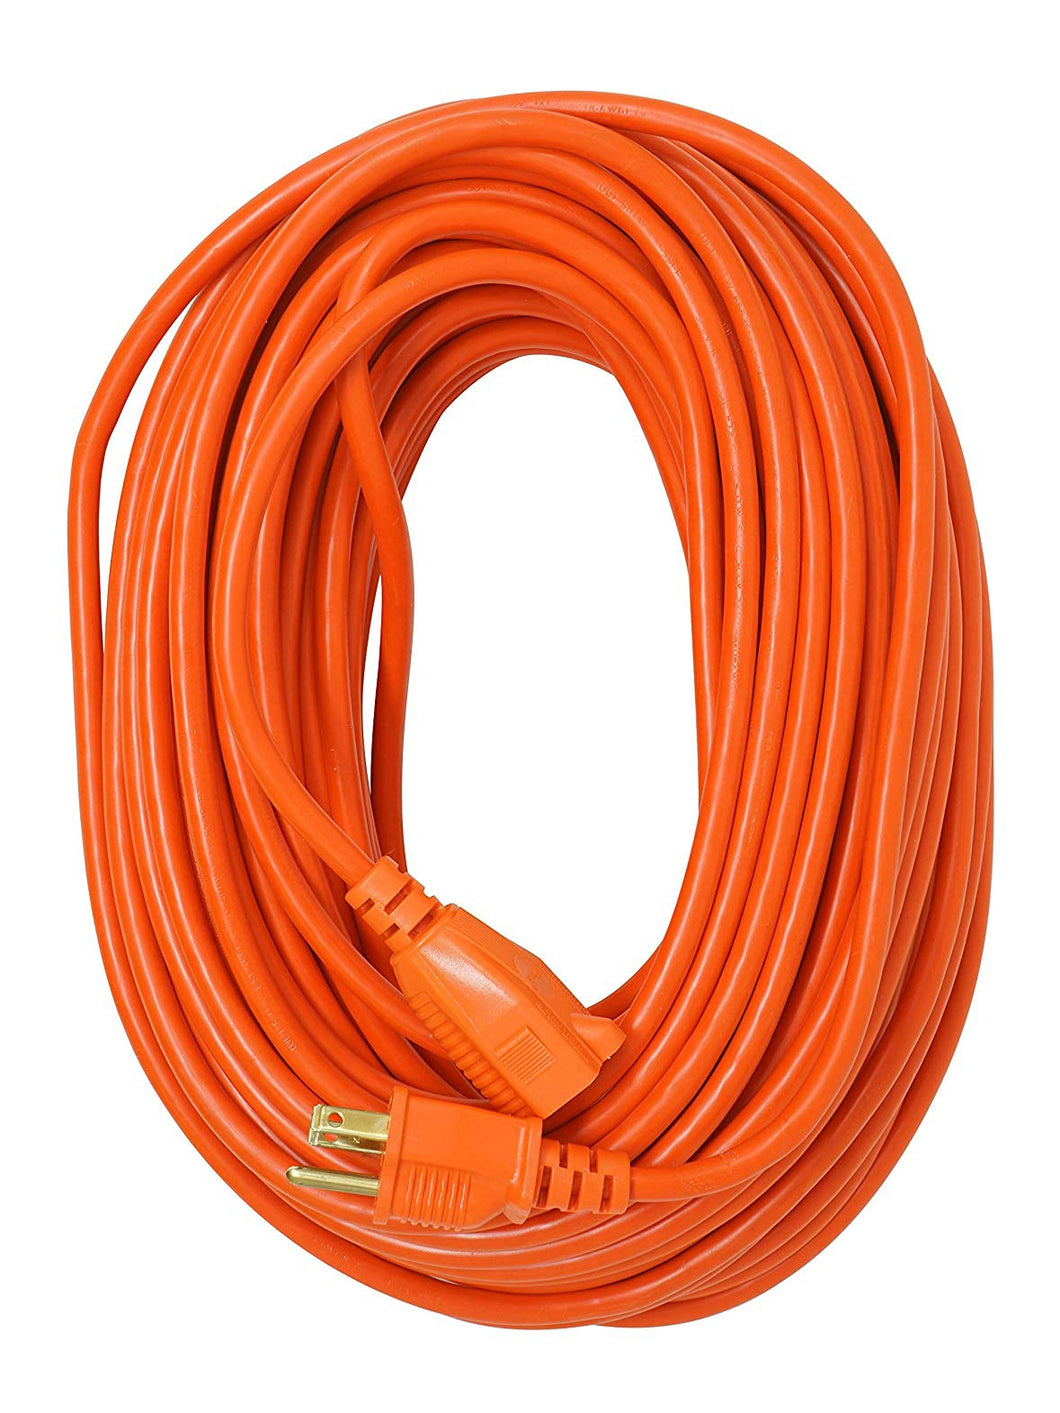 100ft Extension Cord (Only 1 of each color available)